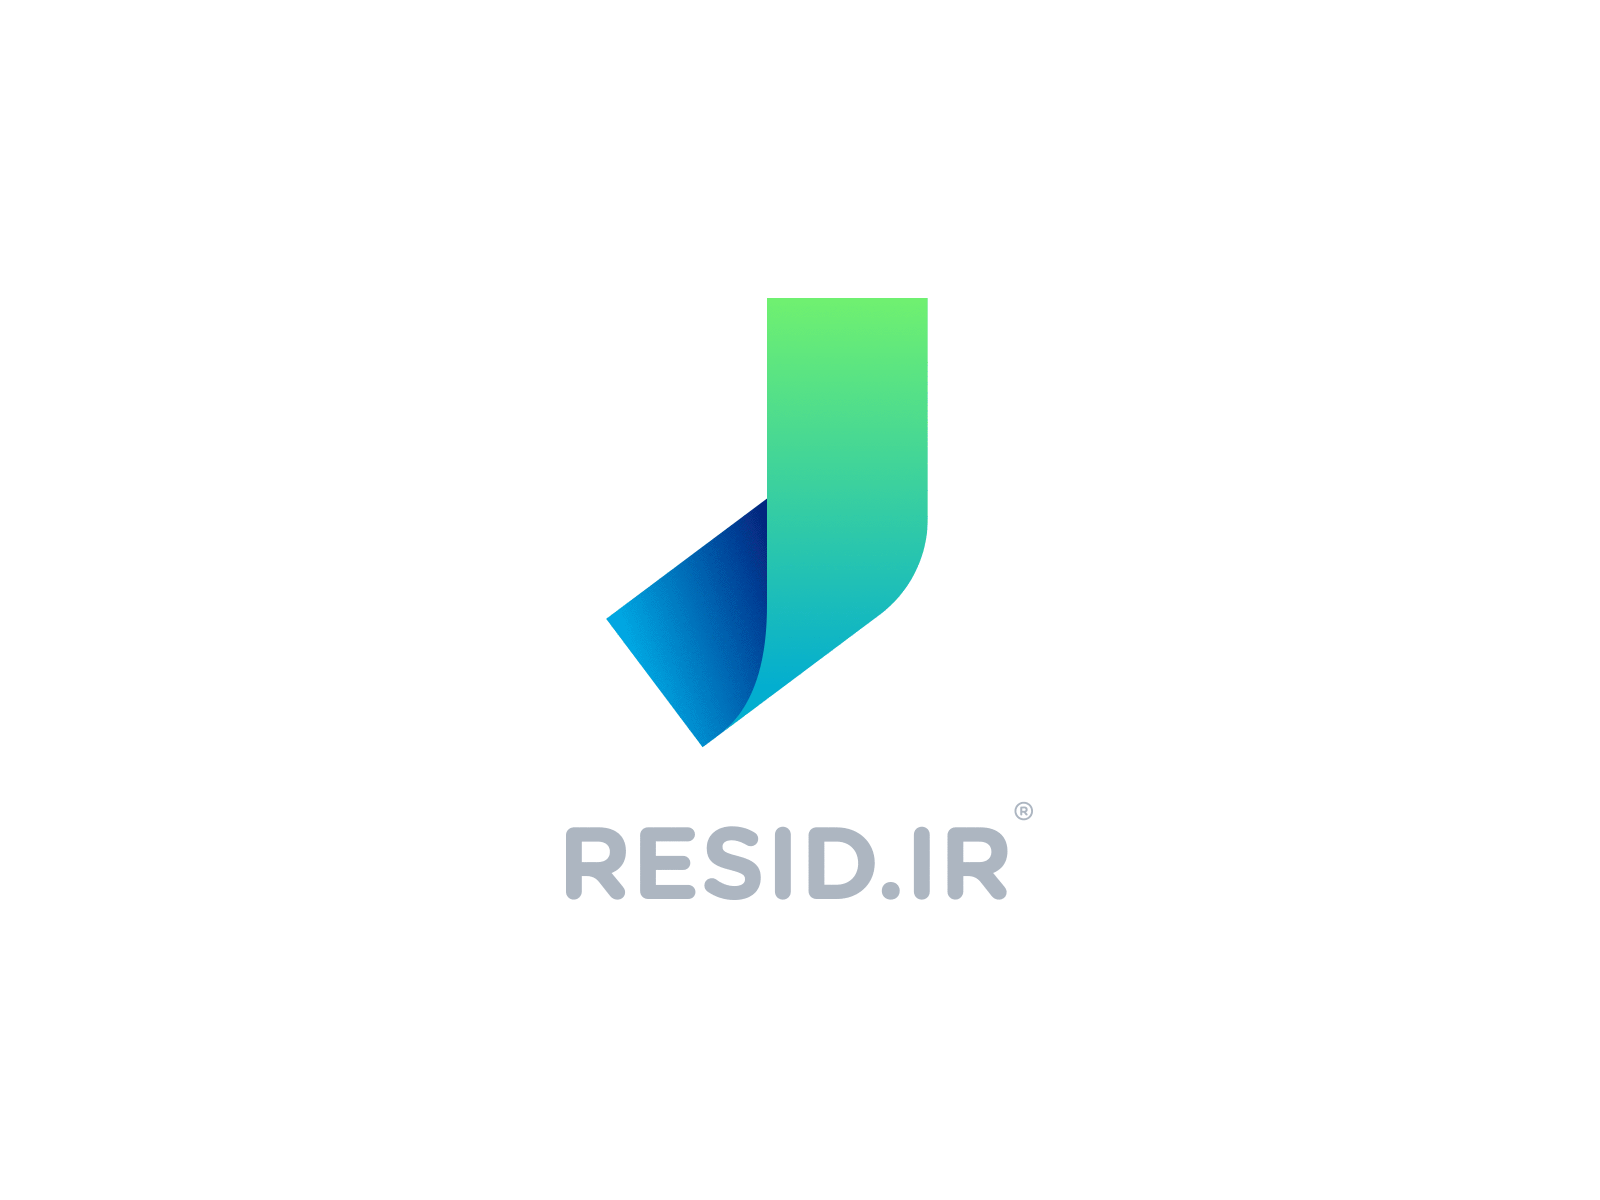 resid-payment-app-website-by-ali-shahi-on-dribbble